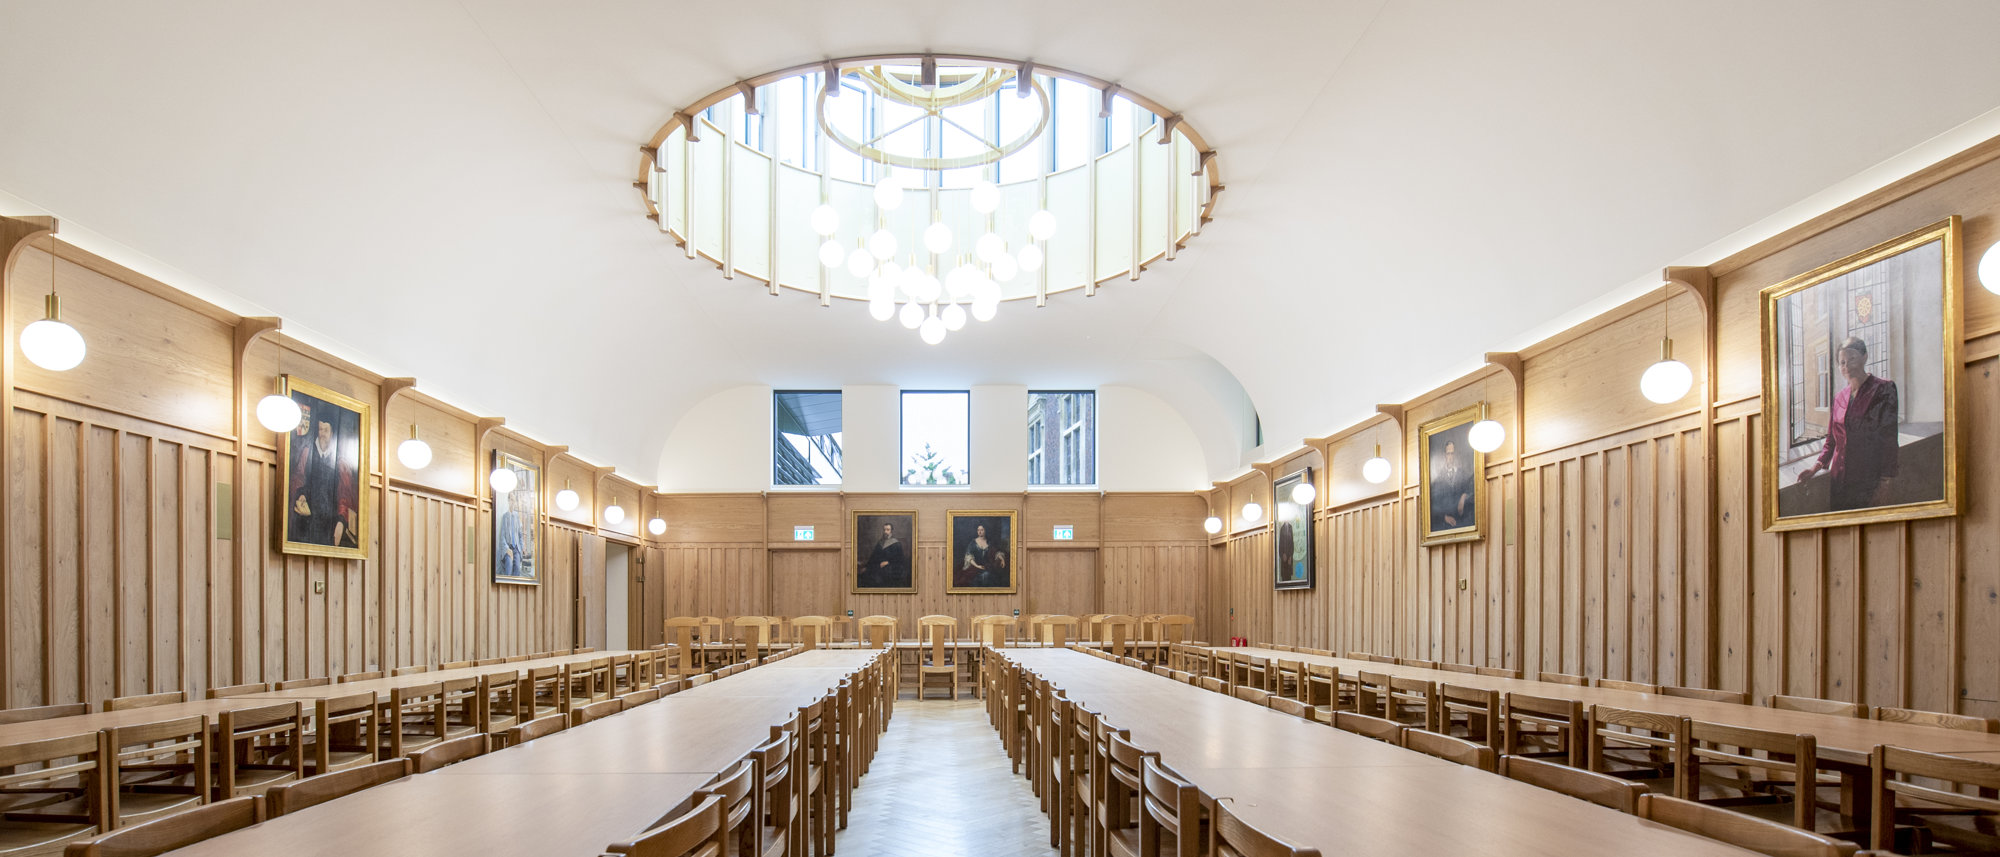  Central Spaces Project, St Catharine's College